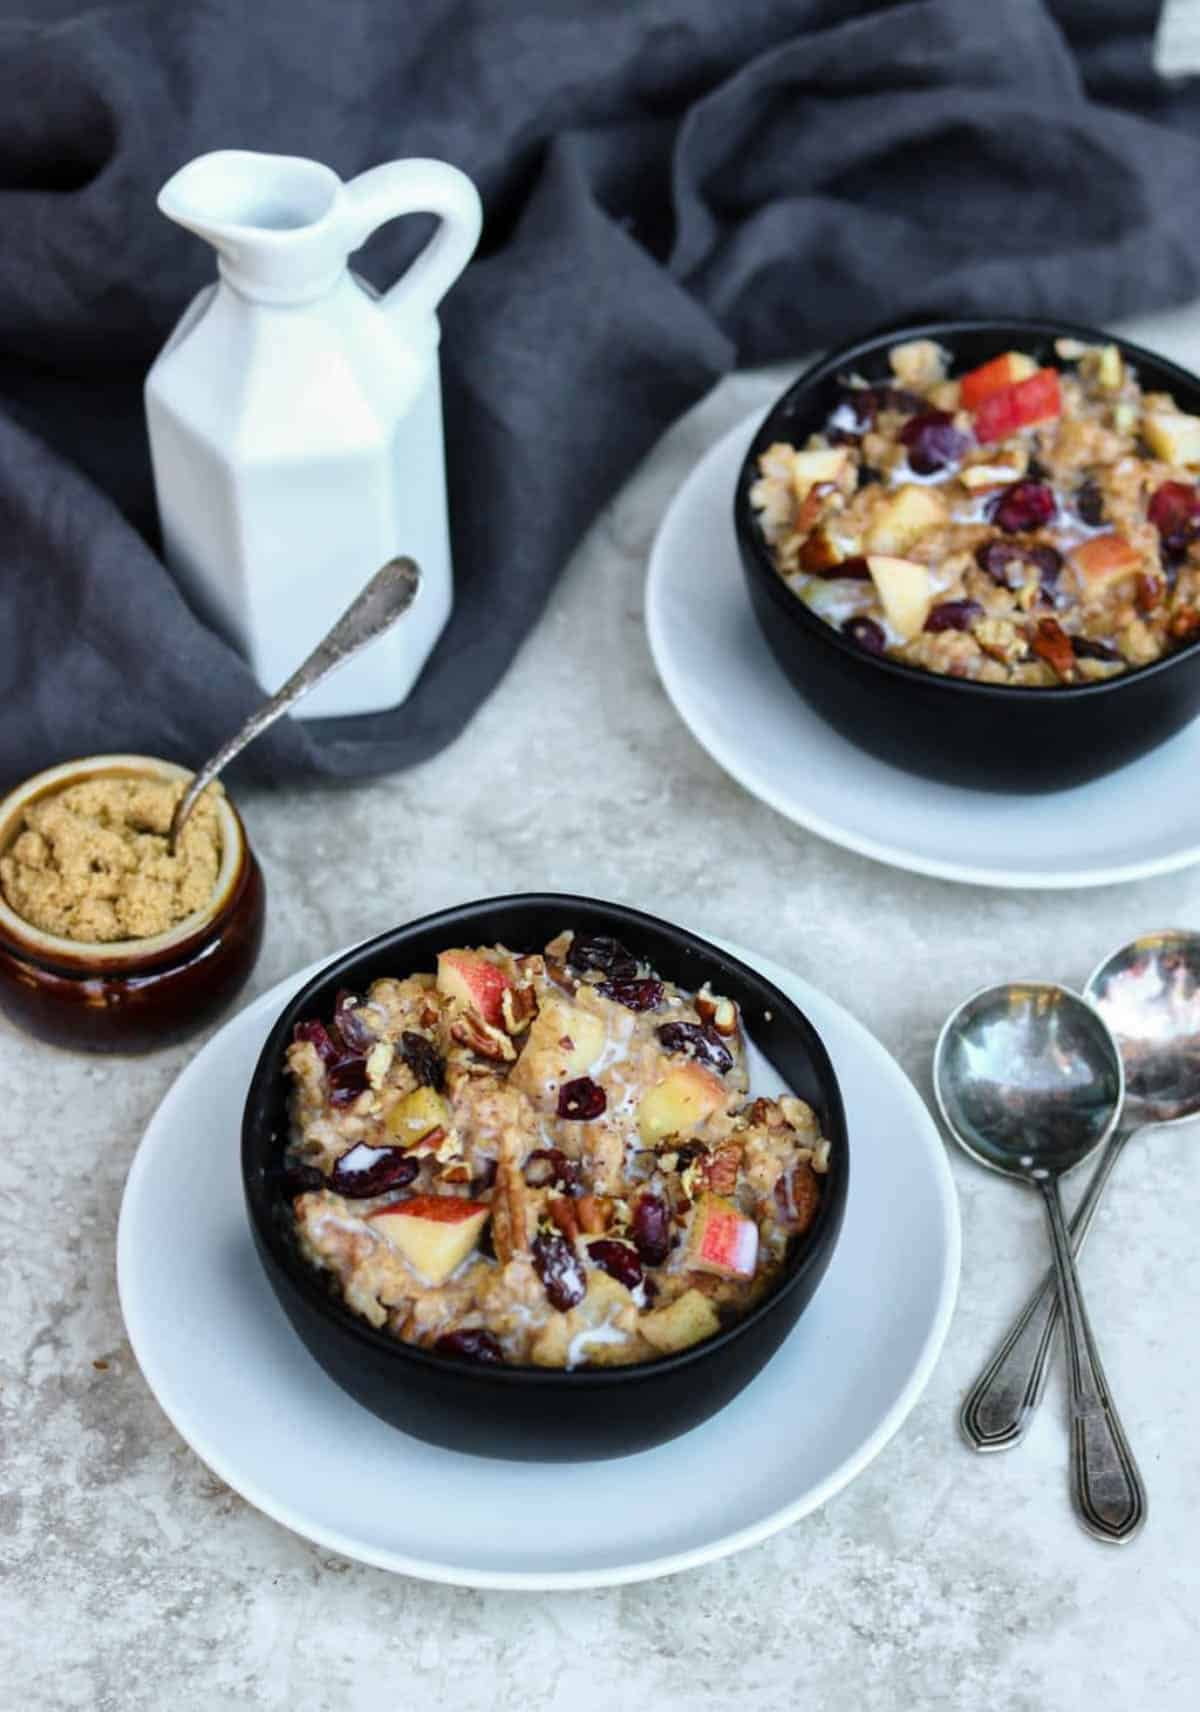 two bowls of oatmeal loaded with fruit and nuts